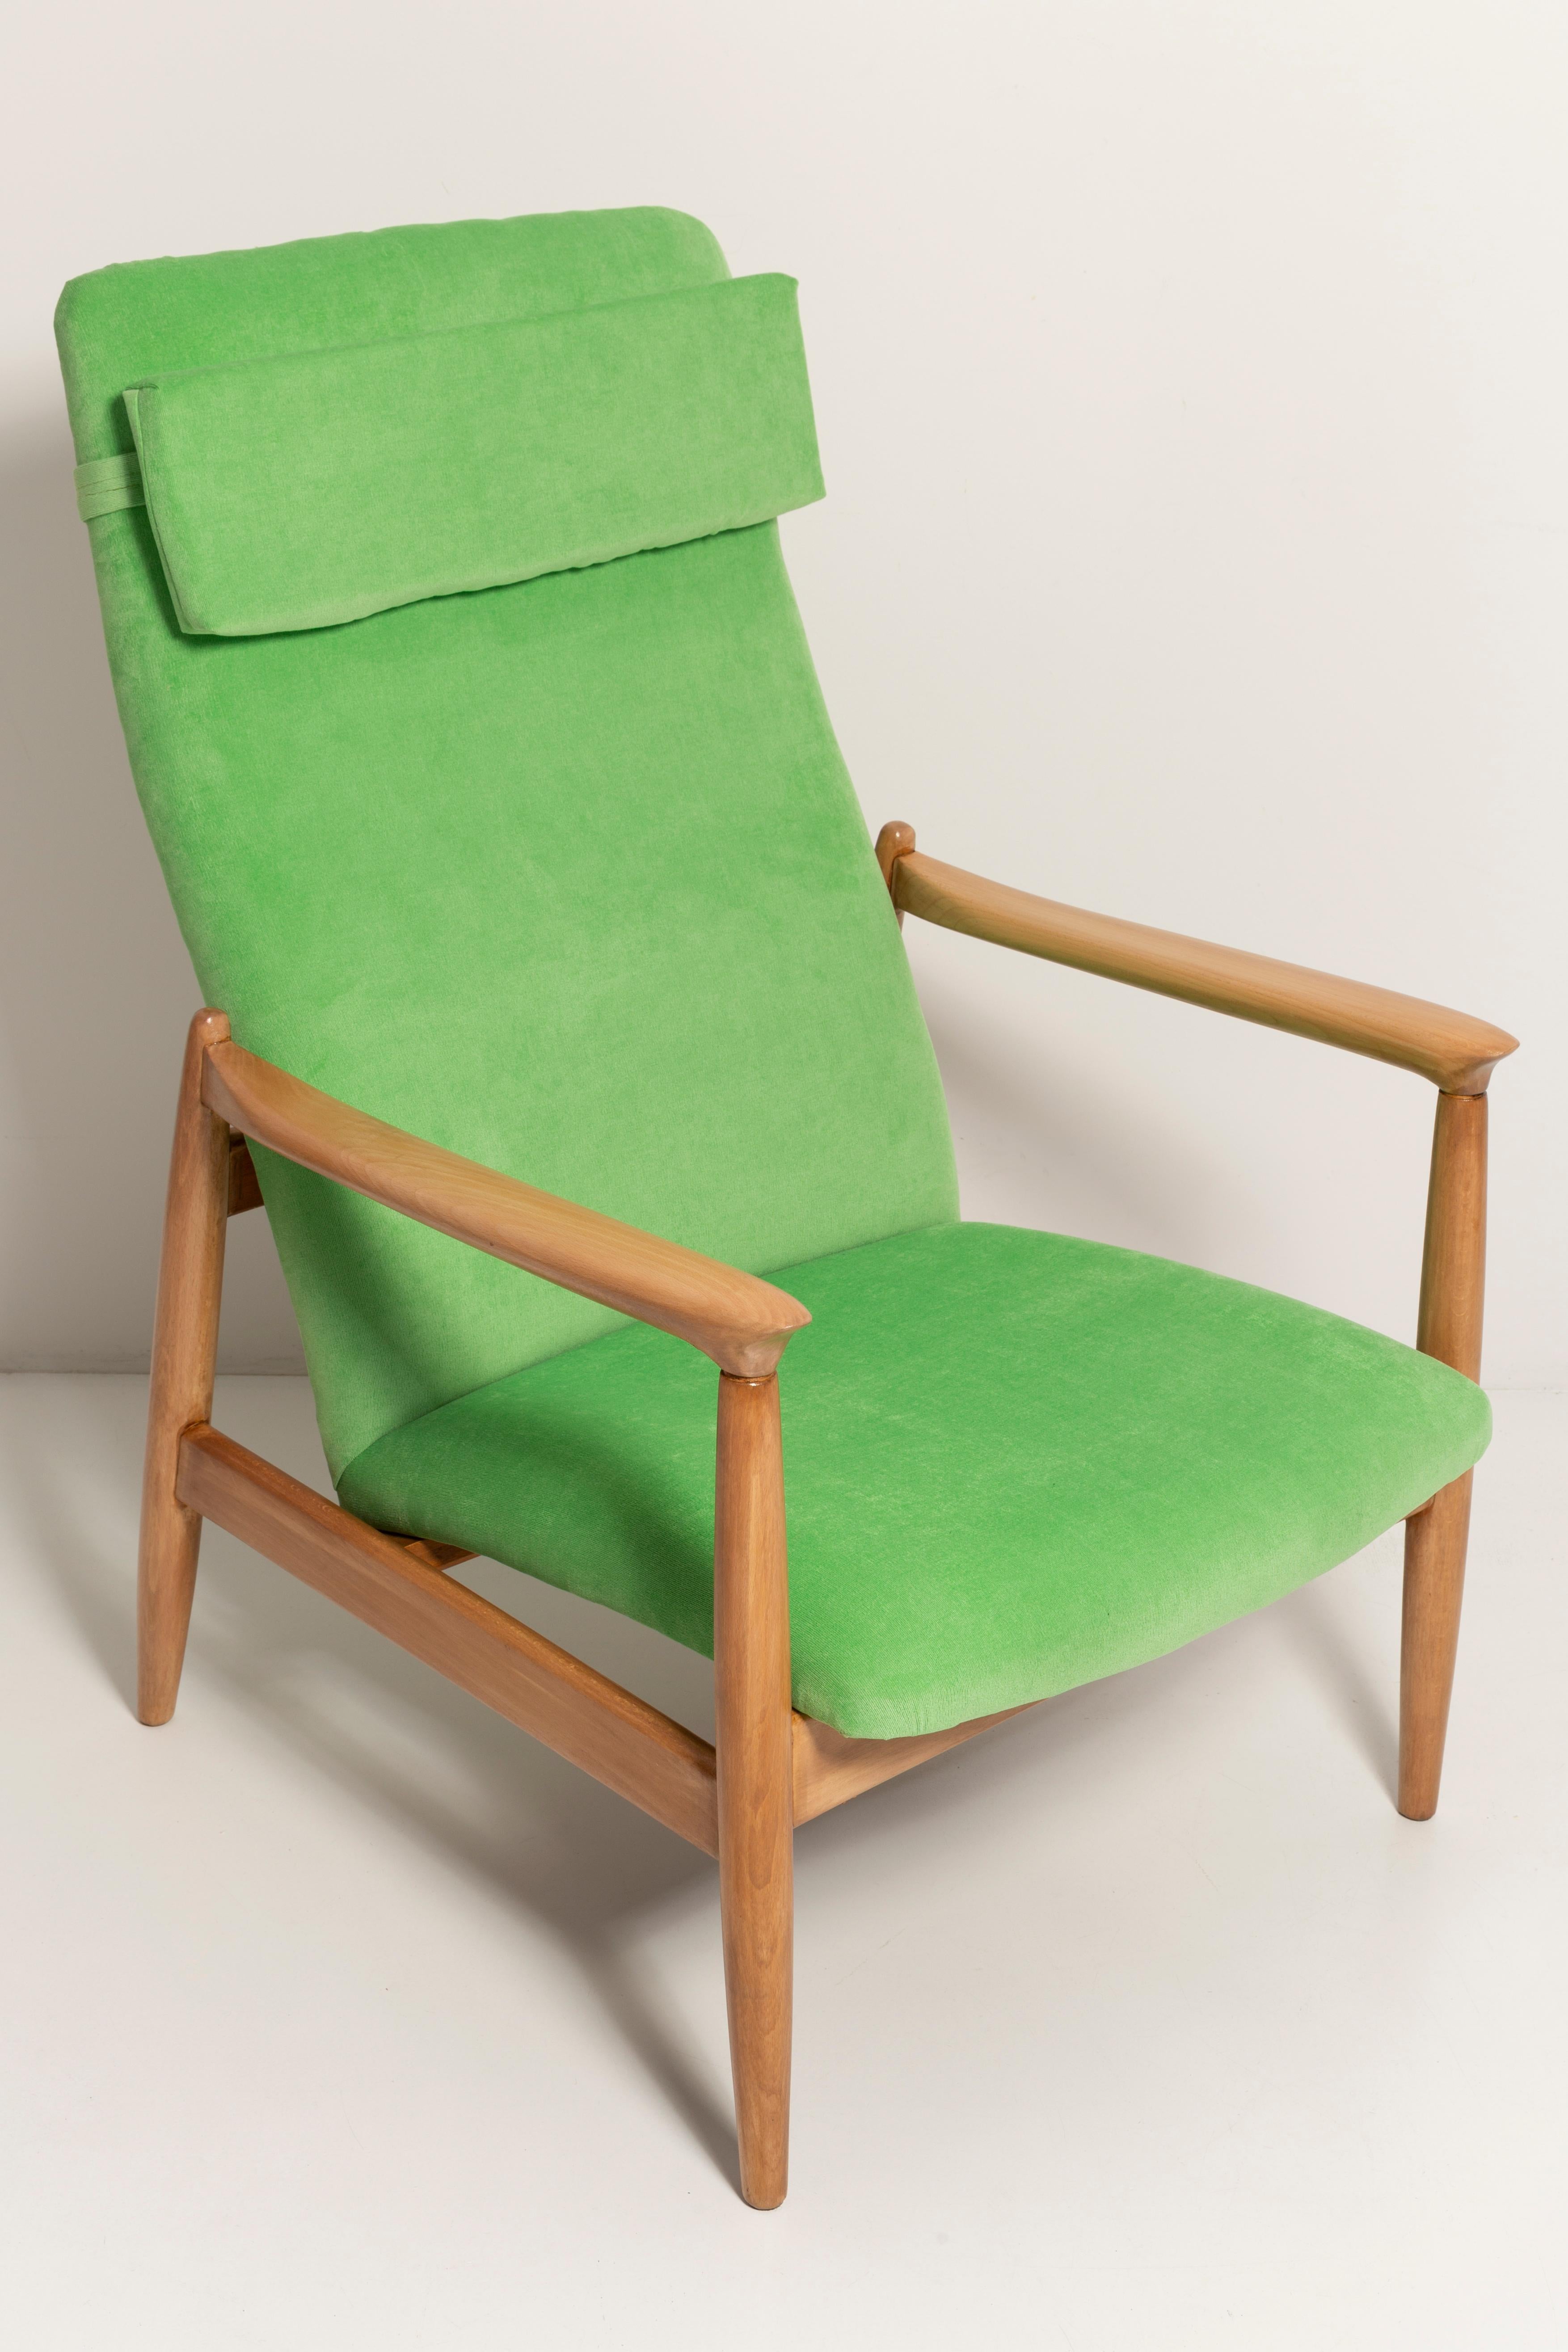 Light lime green velvet armchair (color number 50), designed by Edmund Homa, a Polish architect, designer of Industrial Design and interior architecture, professor at the Academy of Fine Arts in Gdansk.

The armchairs were made in the 1960s in the